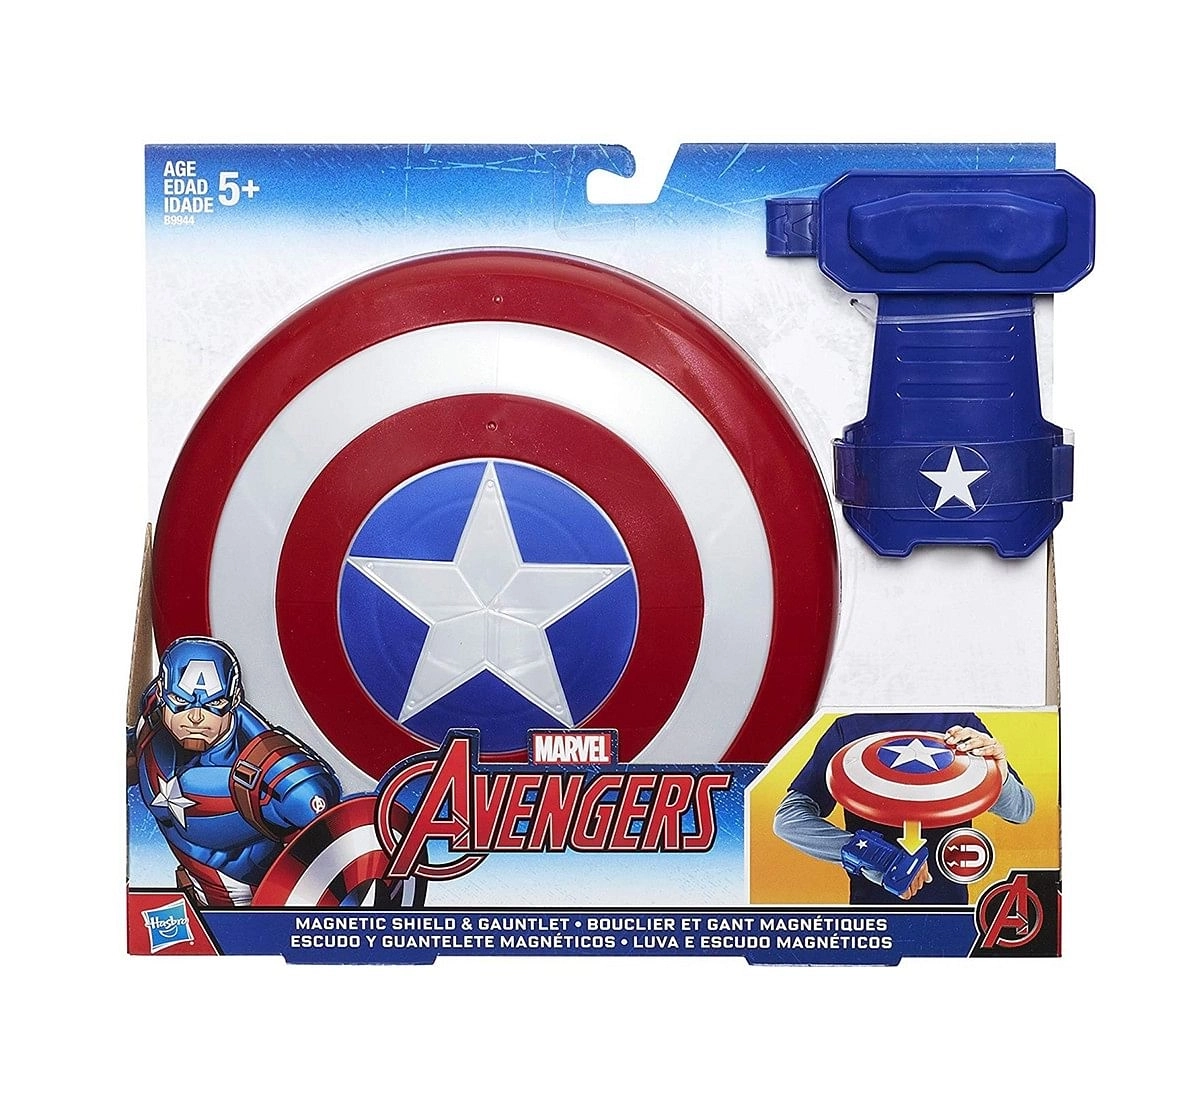 Marvel Avengers Captain America Magnetic Shield And Gauntlet, Multi Color Action Figure Play Sets for Kids age 5Y+ 